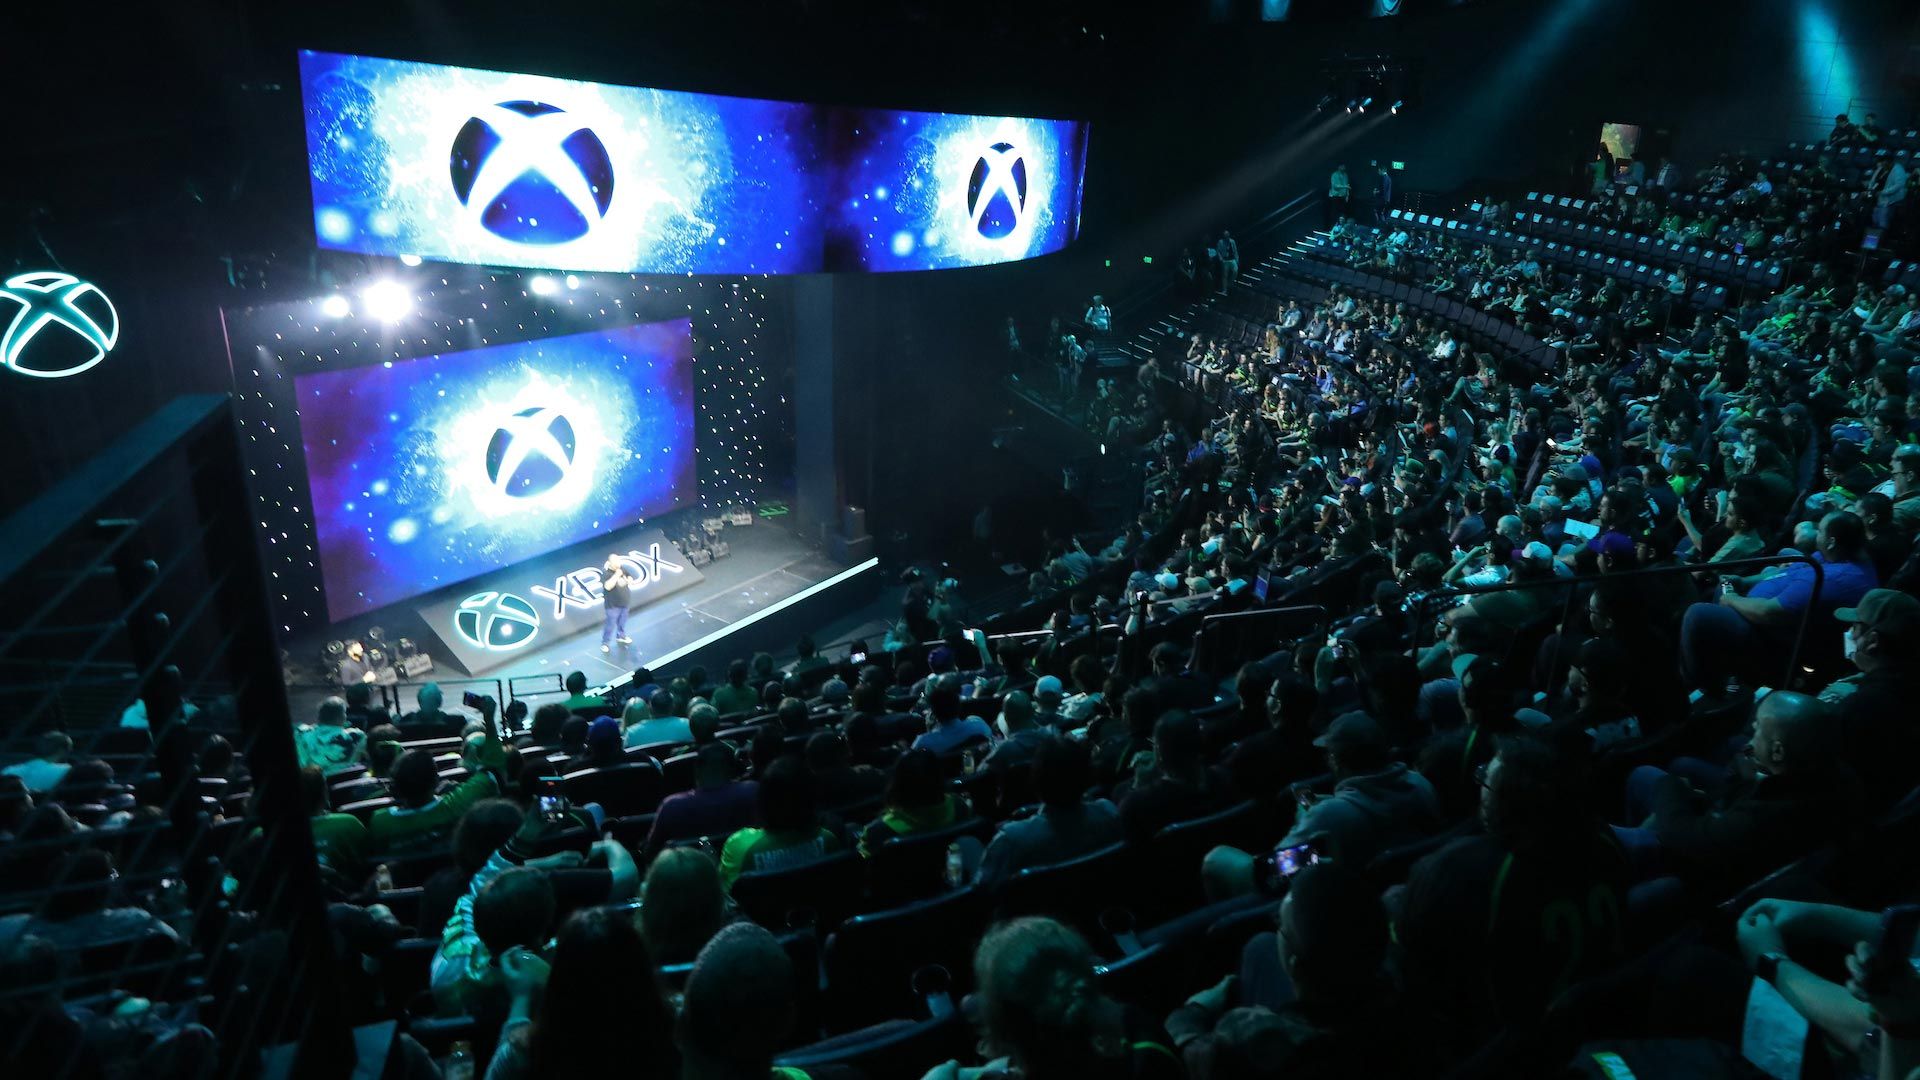 Audience members viewing a stage where multiple Xbox logos are displayed